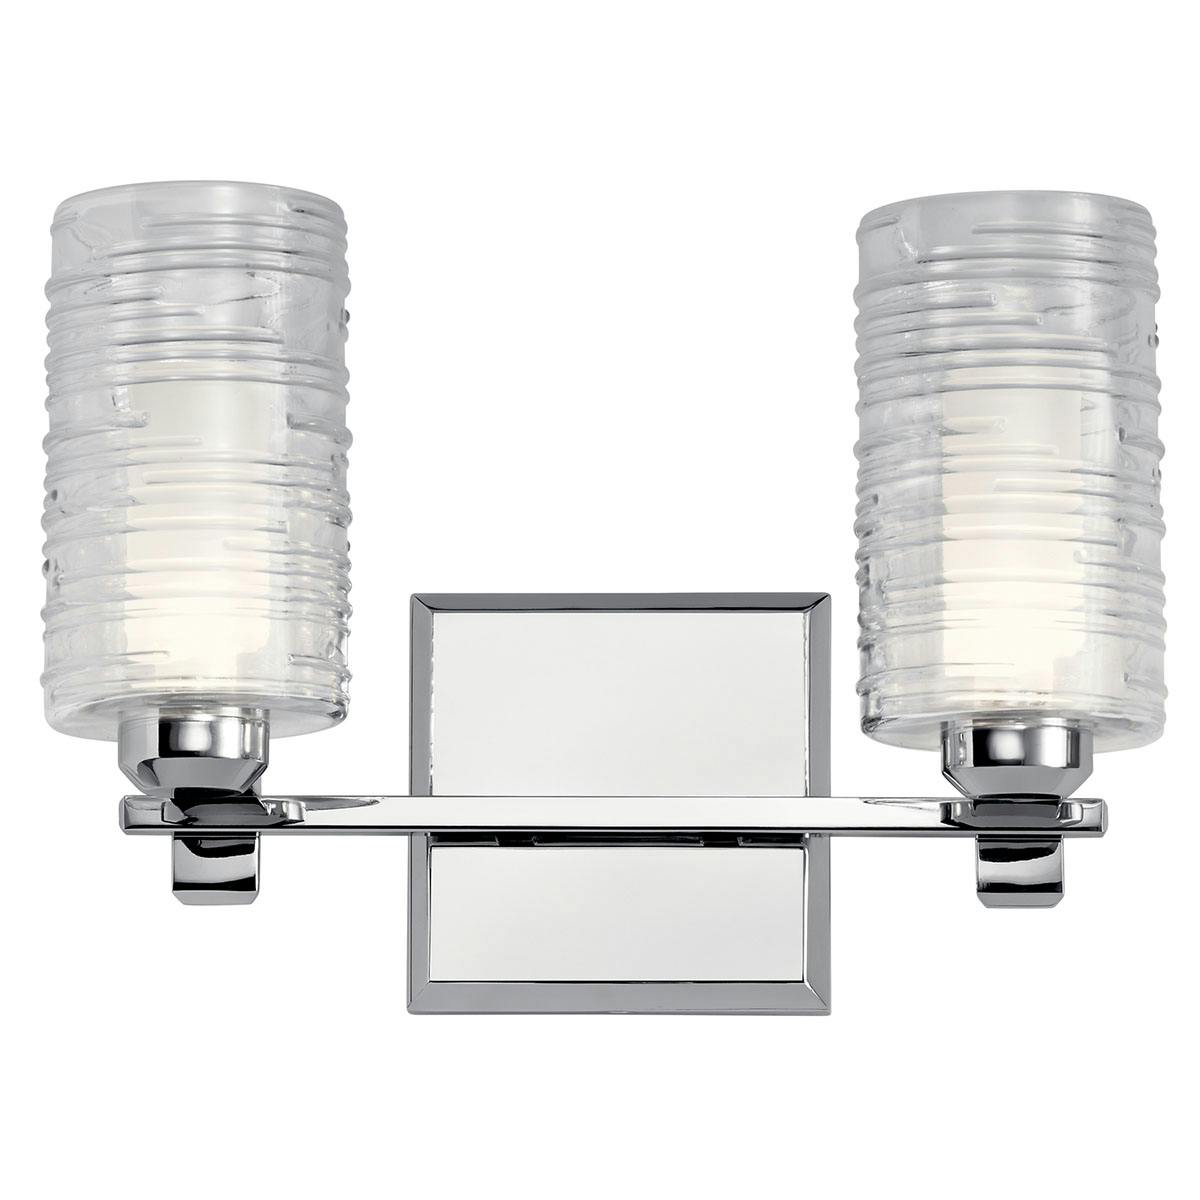 Front view of the Giarosa™ 15" 2 Light Vanity Light Chrome on a white background